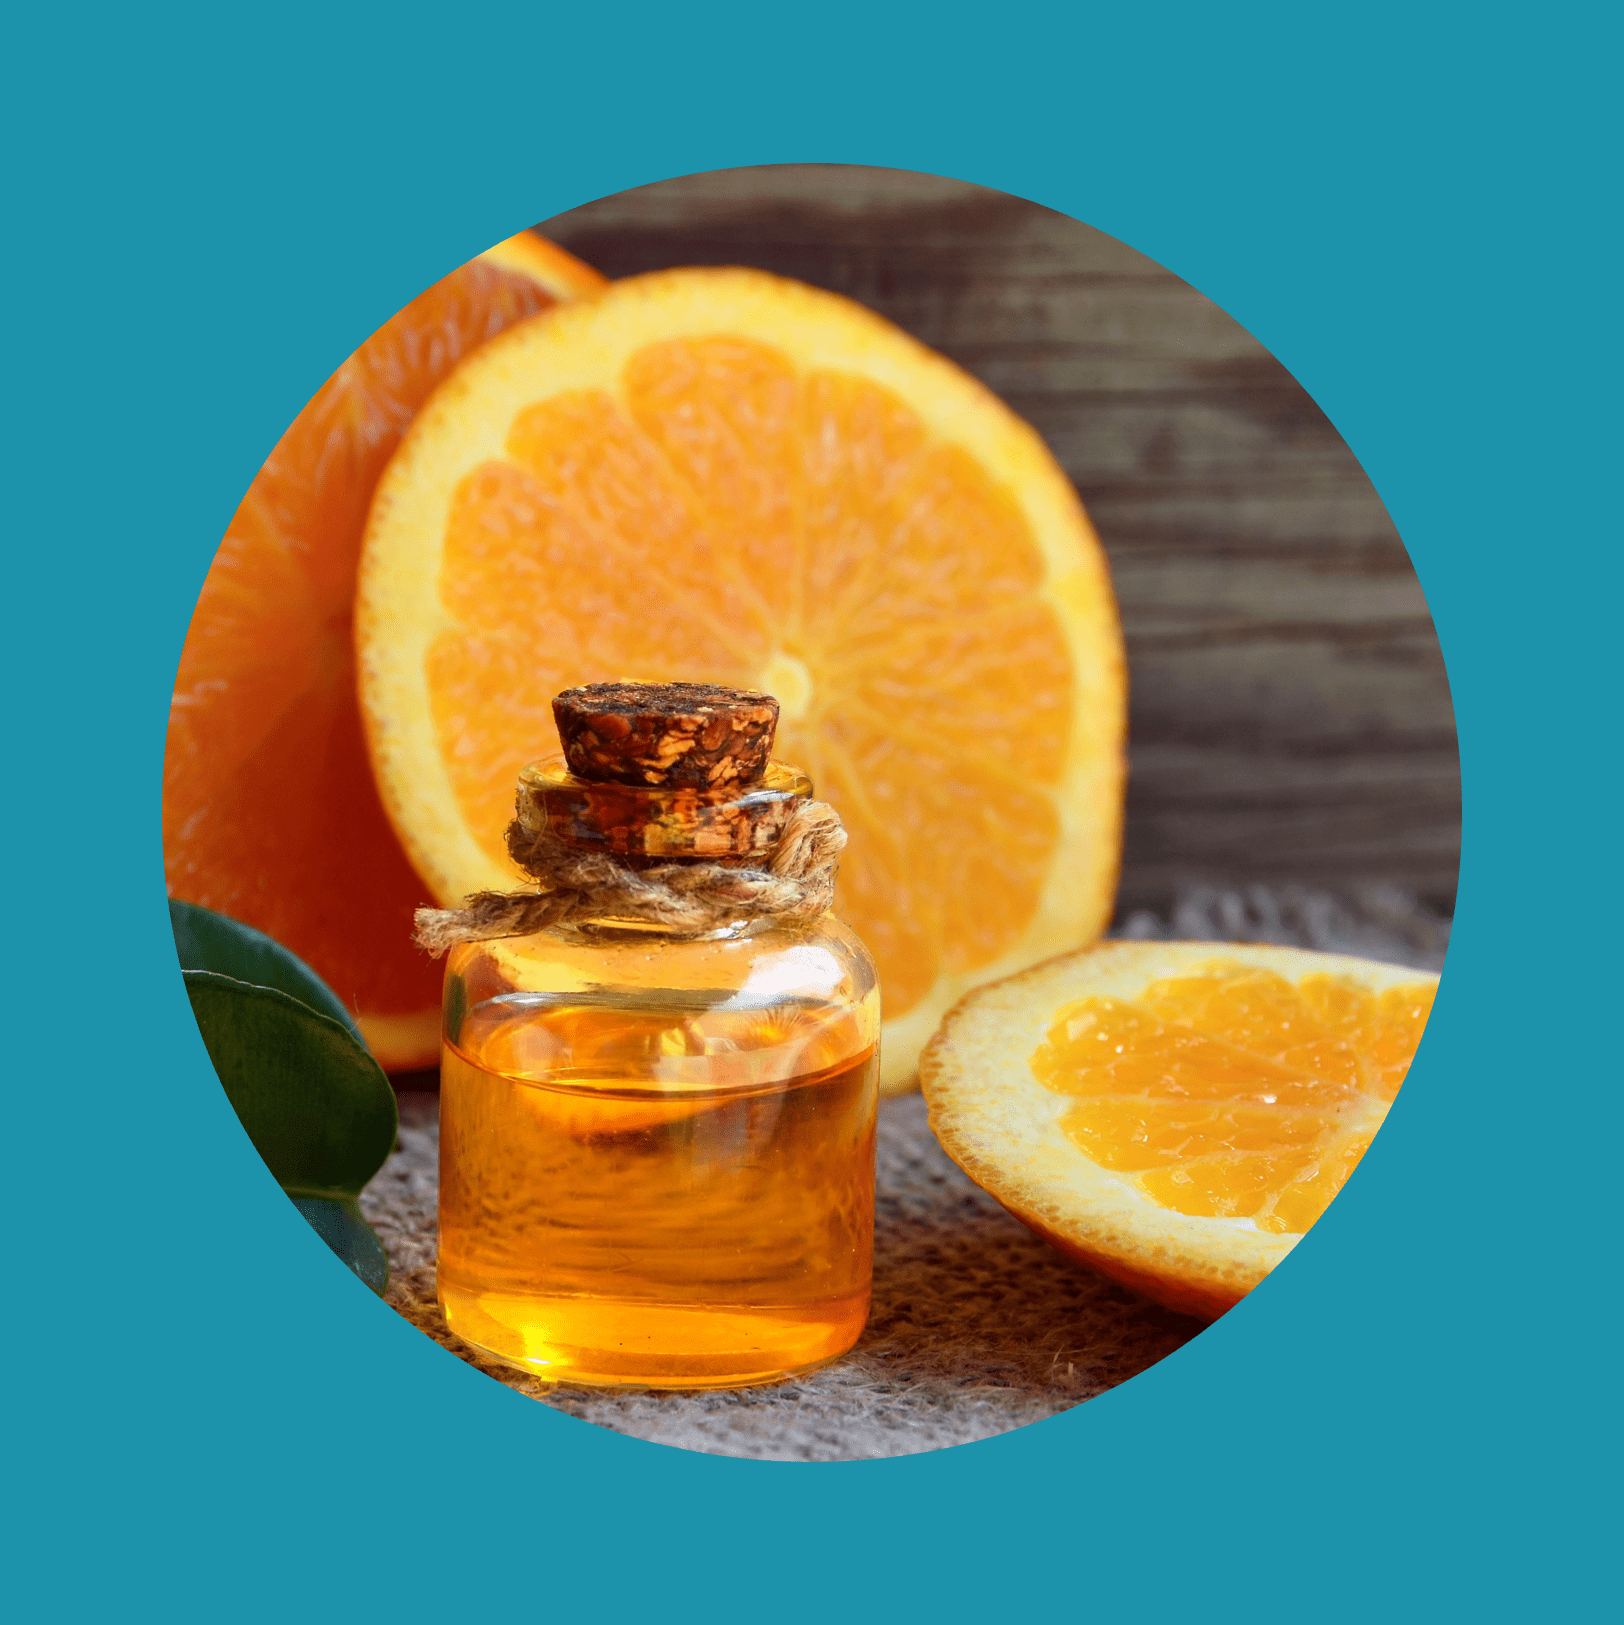 Orange essential oil in a glass bottle and fresh fruits on old wooden table.Citrus oil for skin care, spa, wellness, massage, aromatherapy and natural medicine.Selective focus.